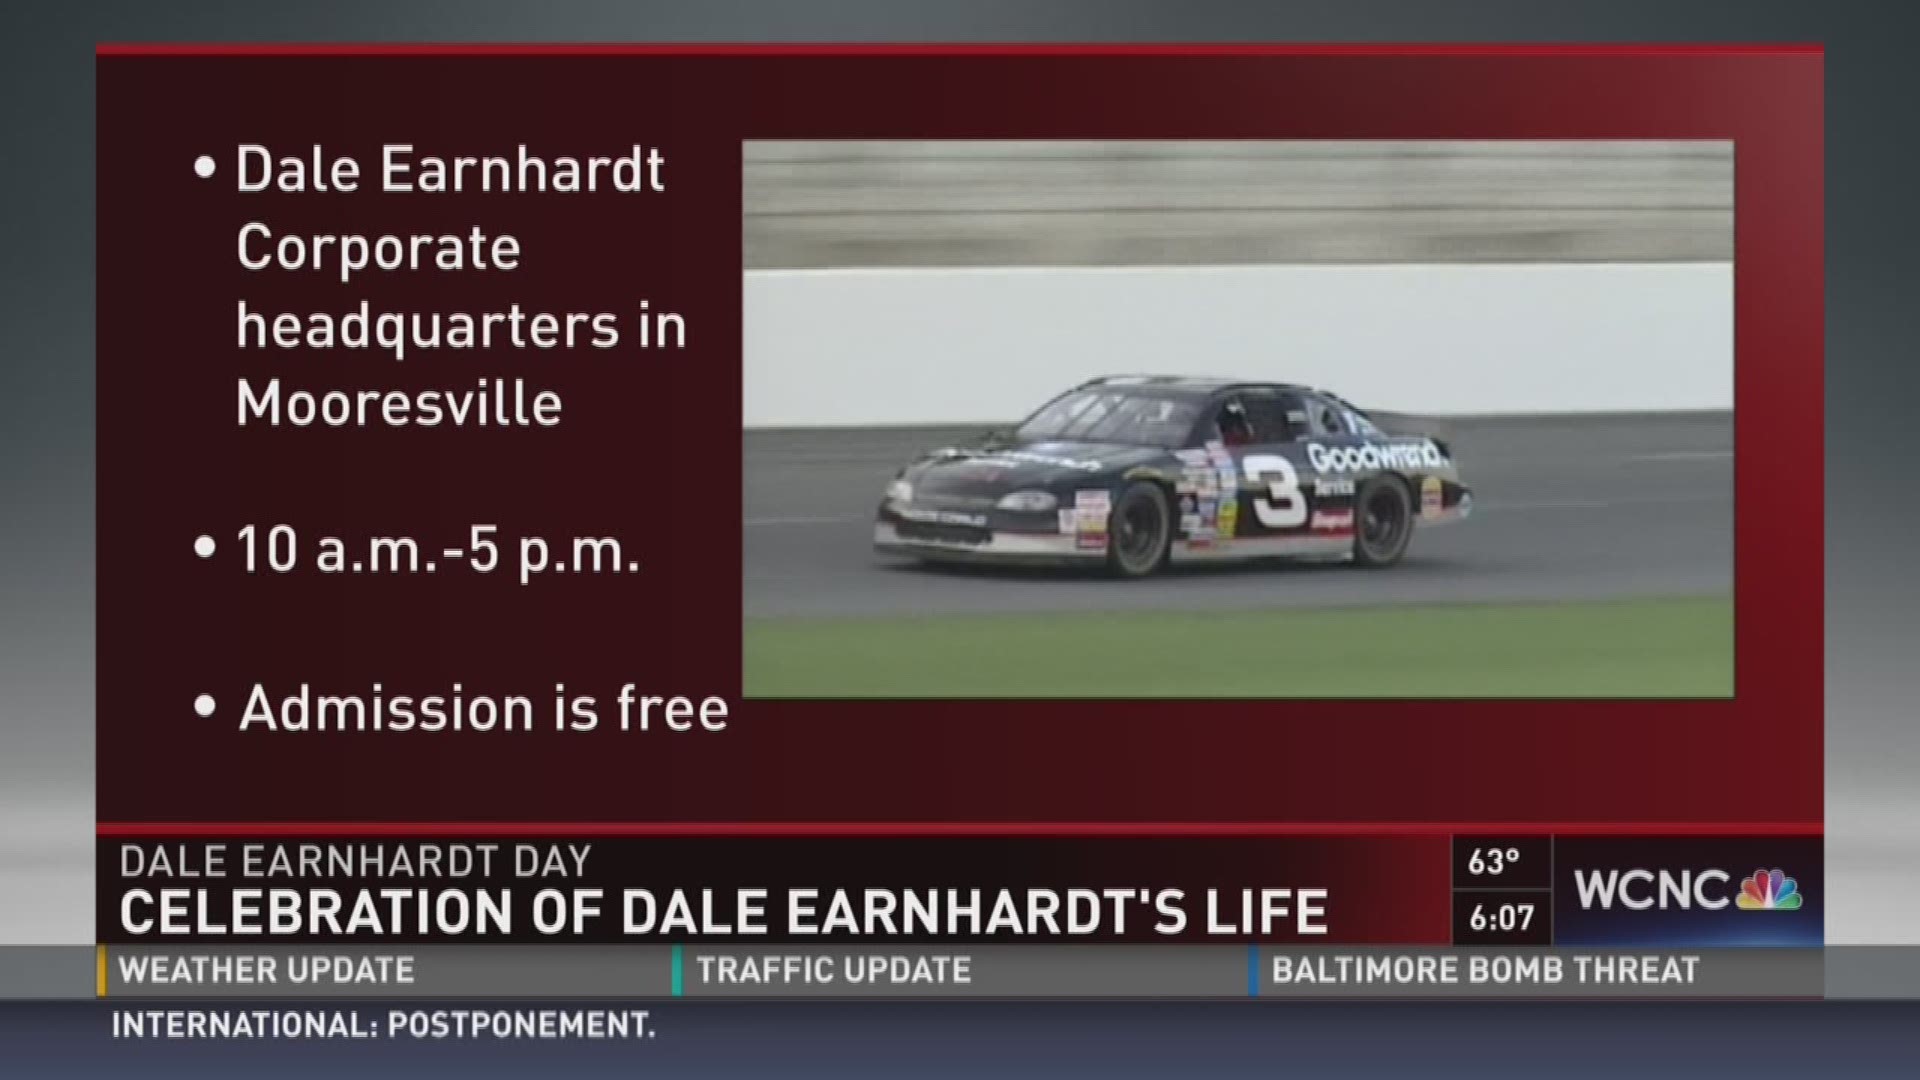 Dale Earnhardt Incorporated is hosting its annual "Dale Earnhardt Day" celebration Friday, in tribute to the late racer's birthday.